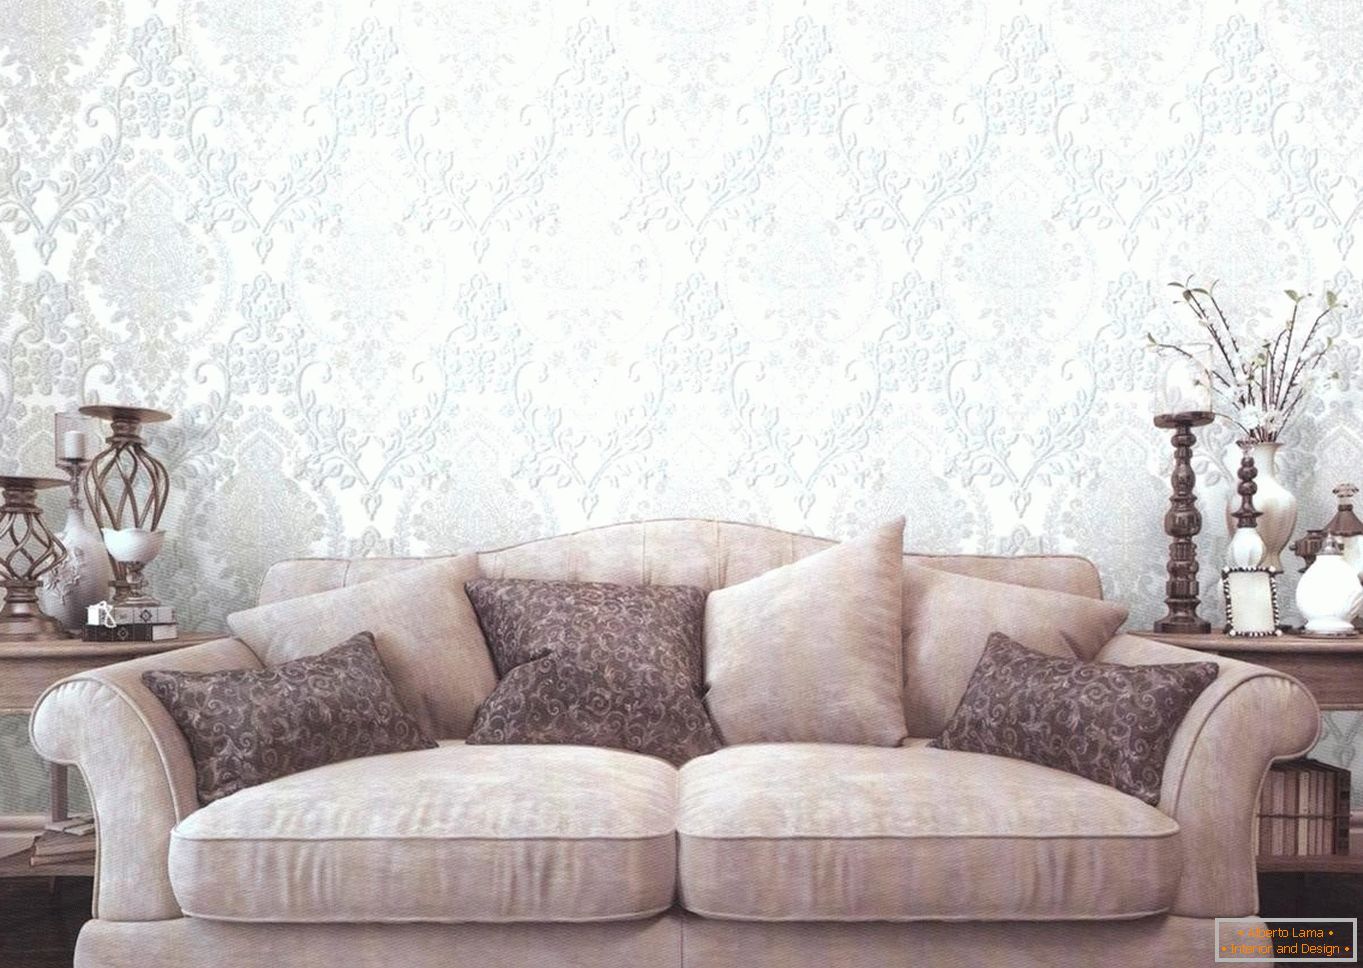 Light wallpaper with a classic pattern